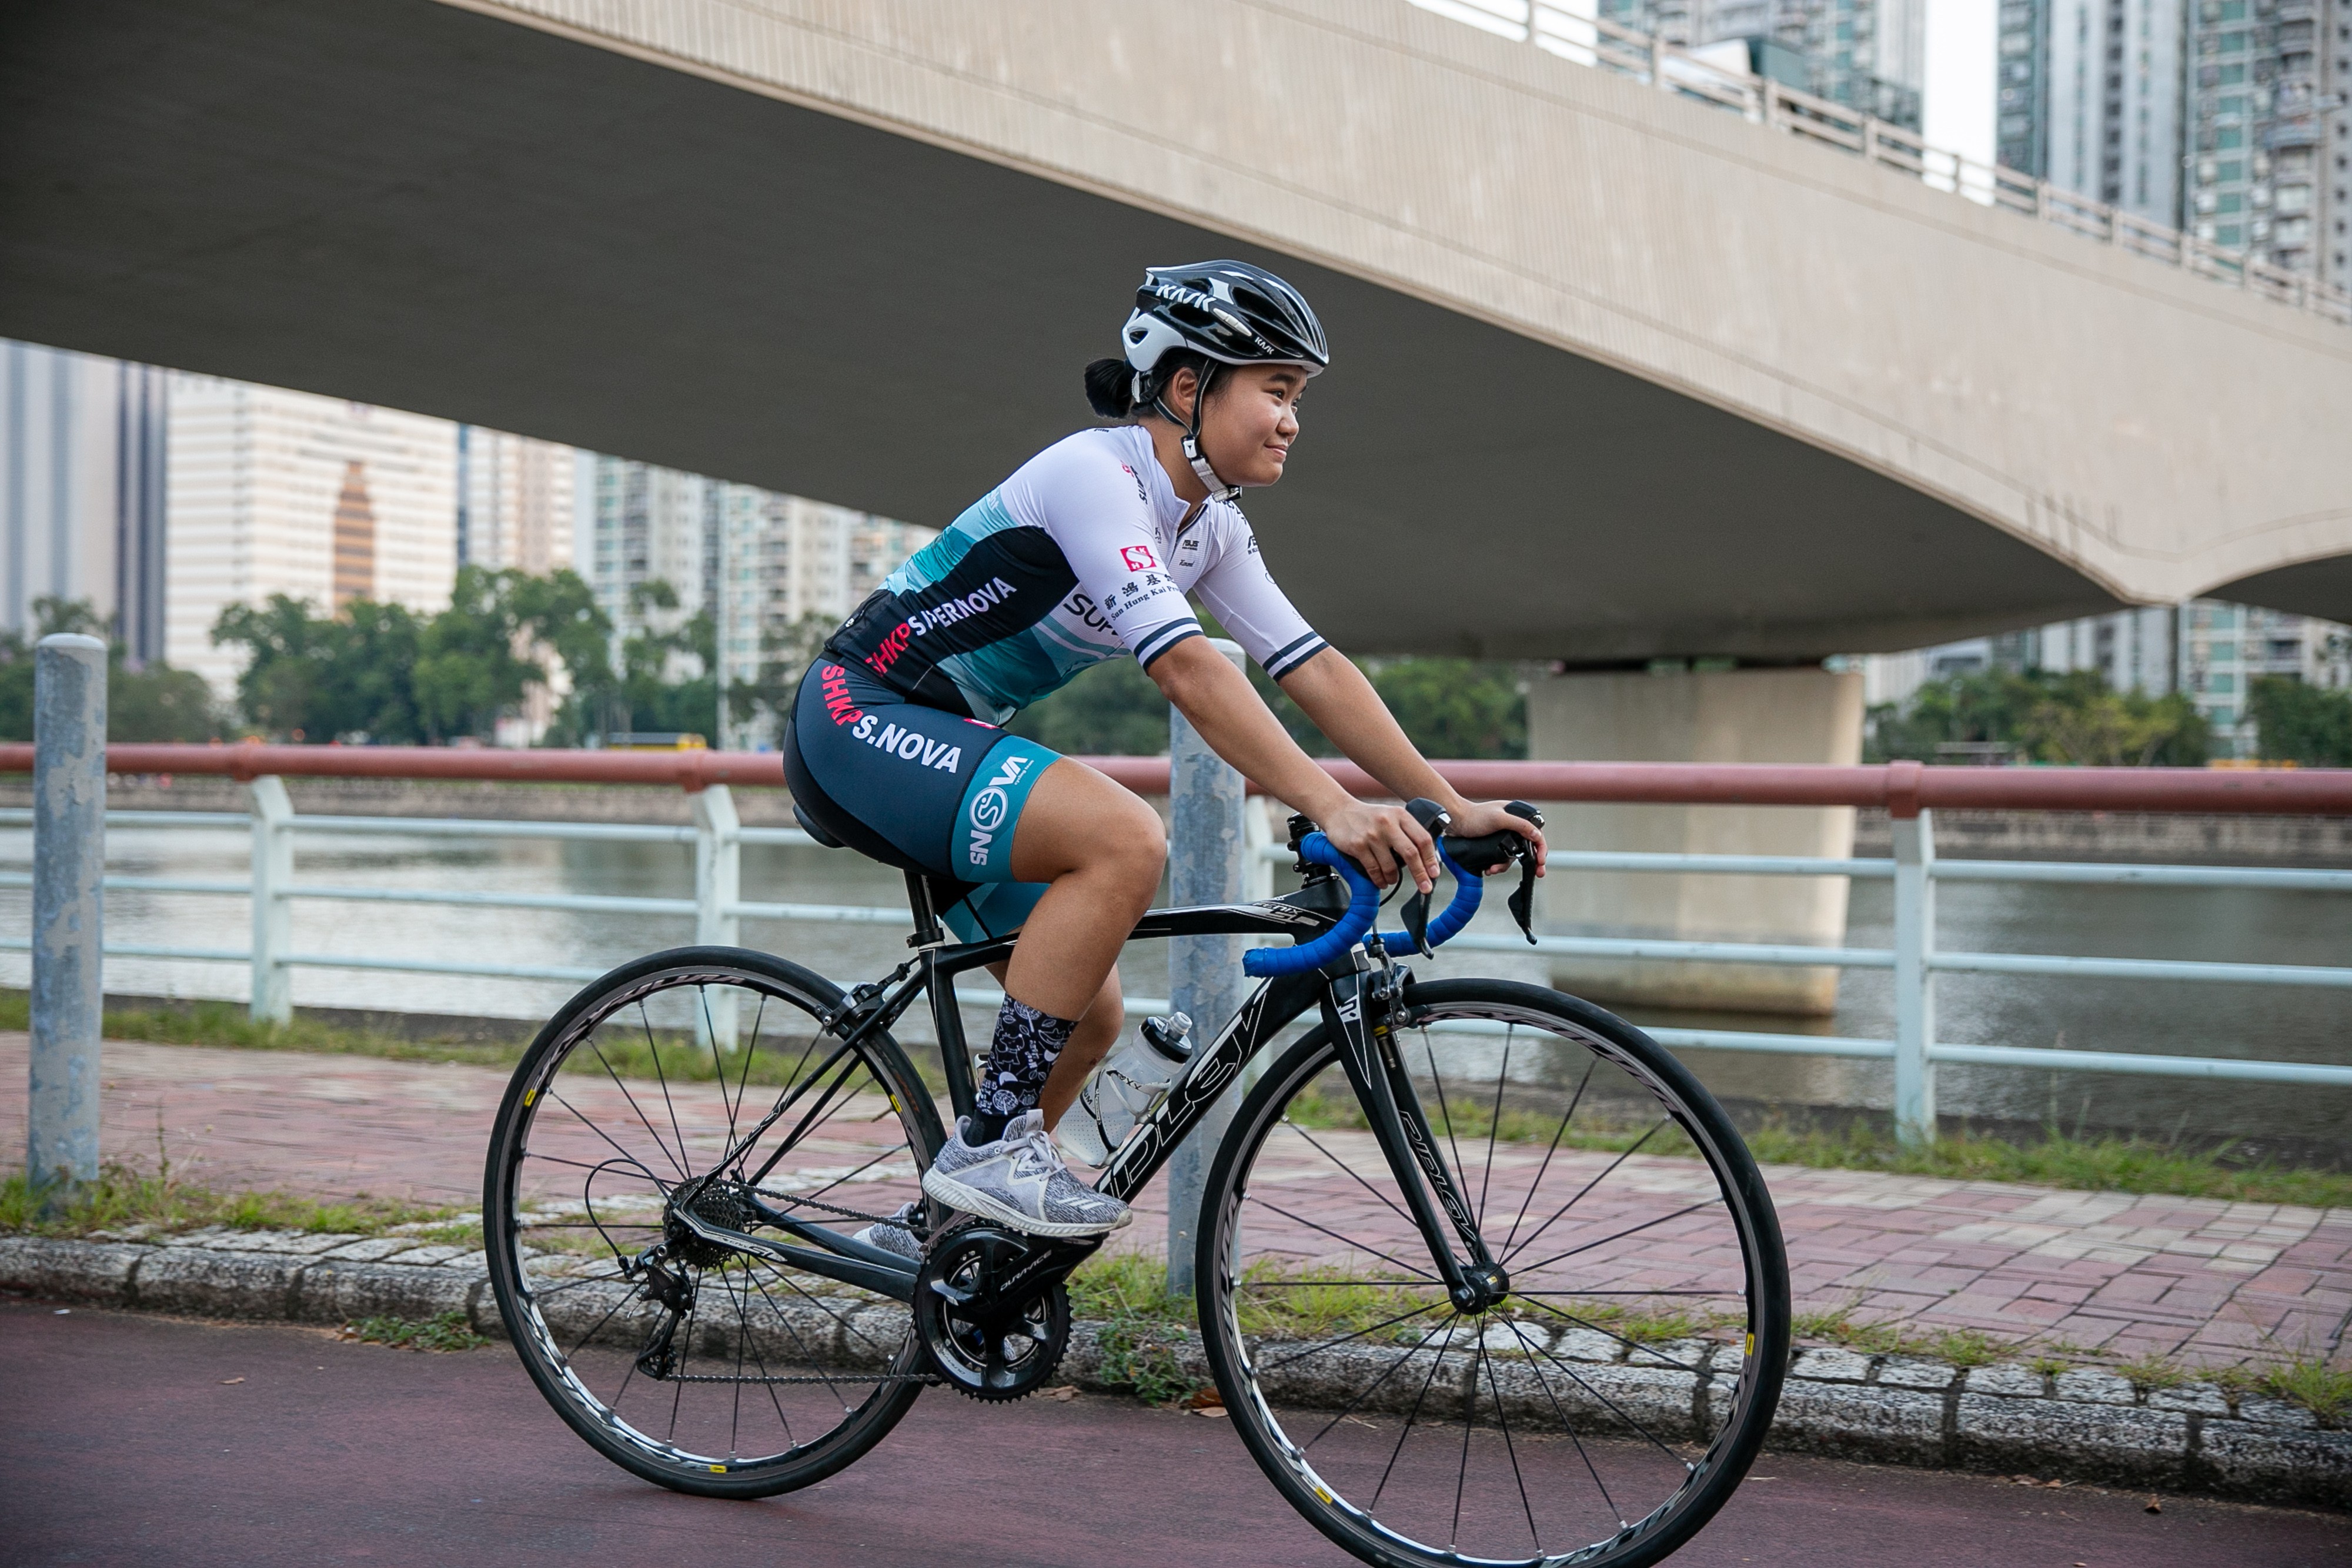 Yvonne Ching discovered her passion for cycling after watching Sarah Lee's performance at the 2016 Rio Olympics. 